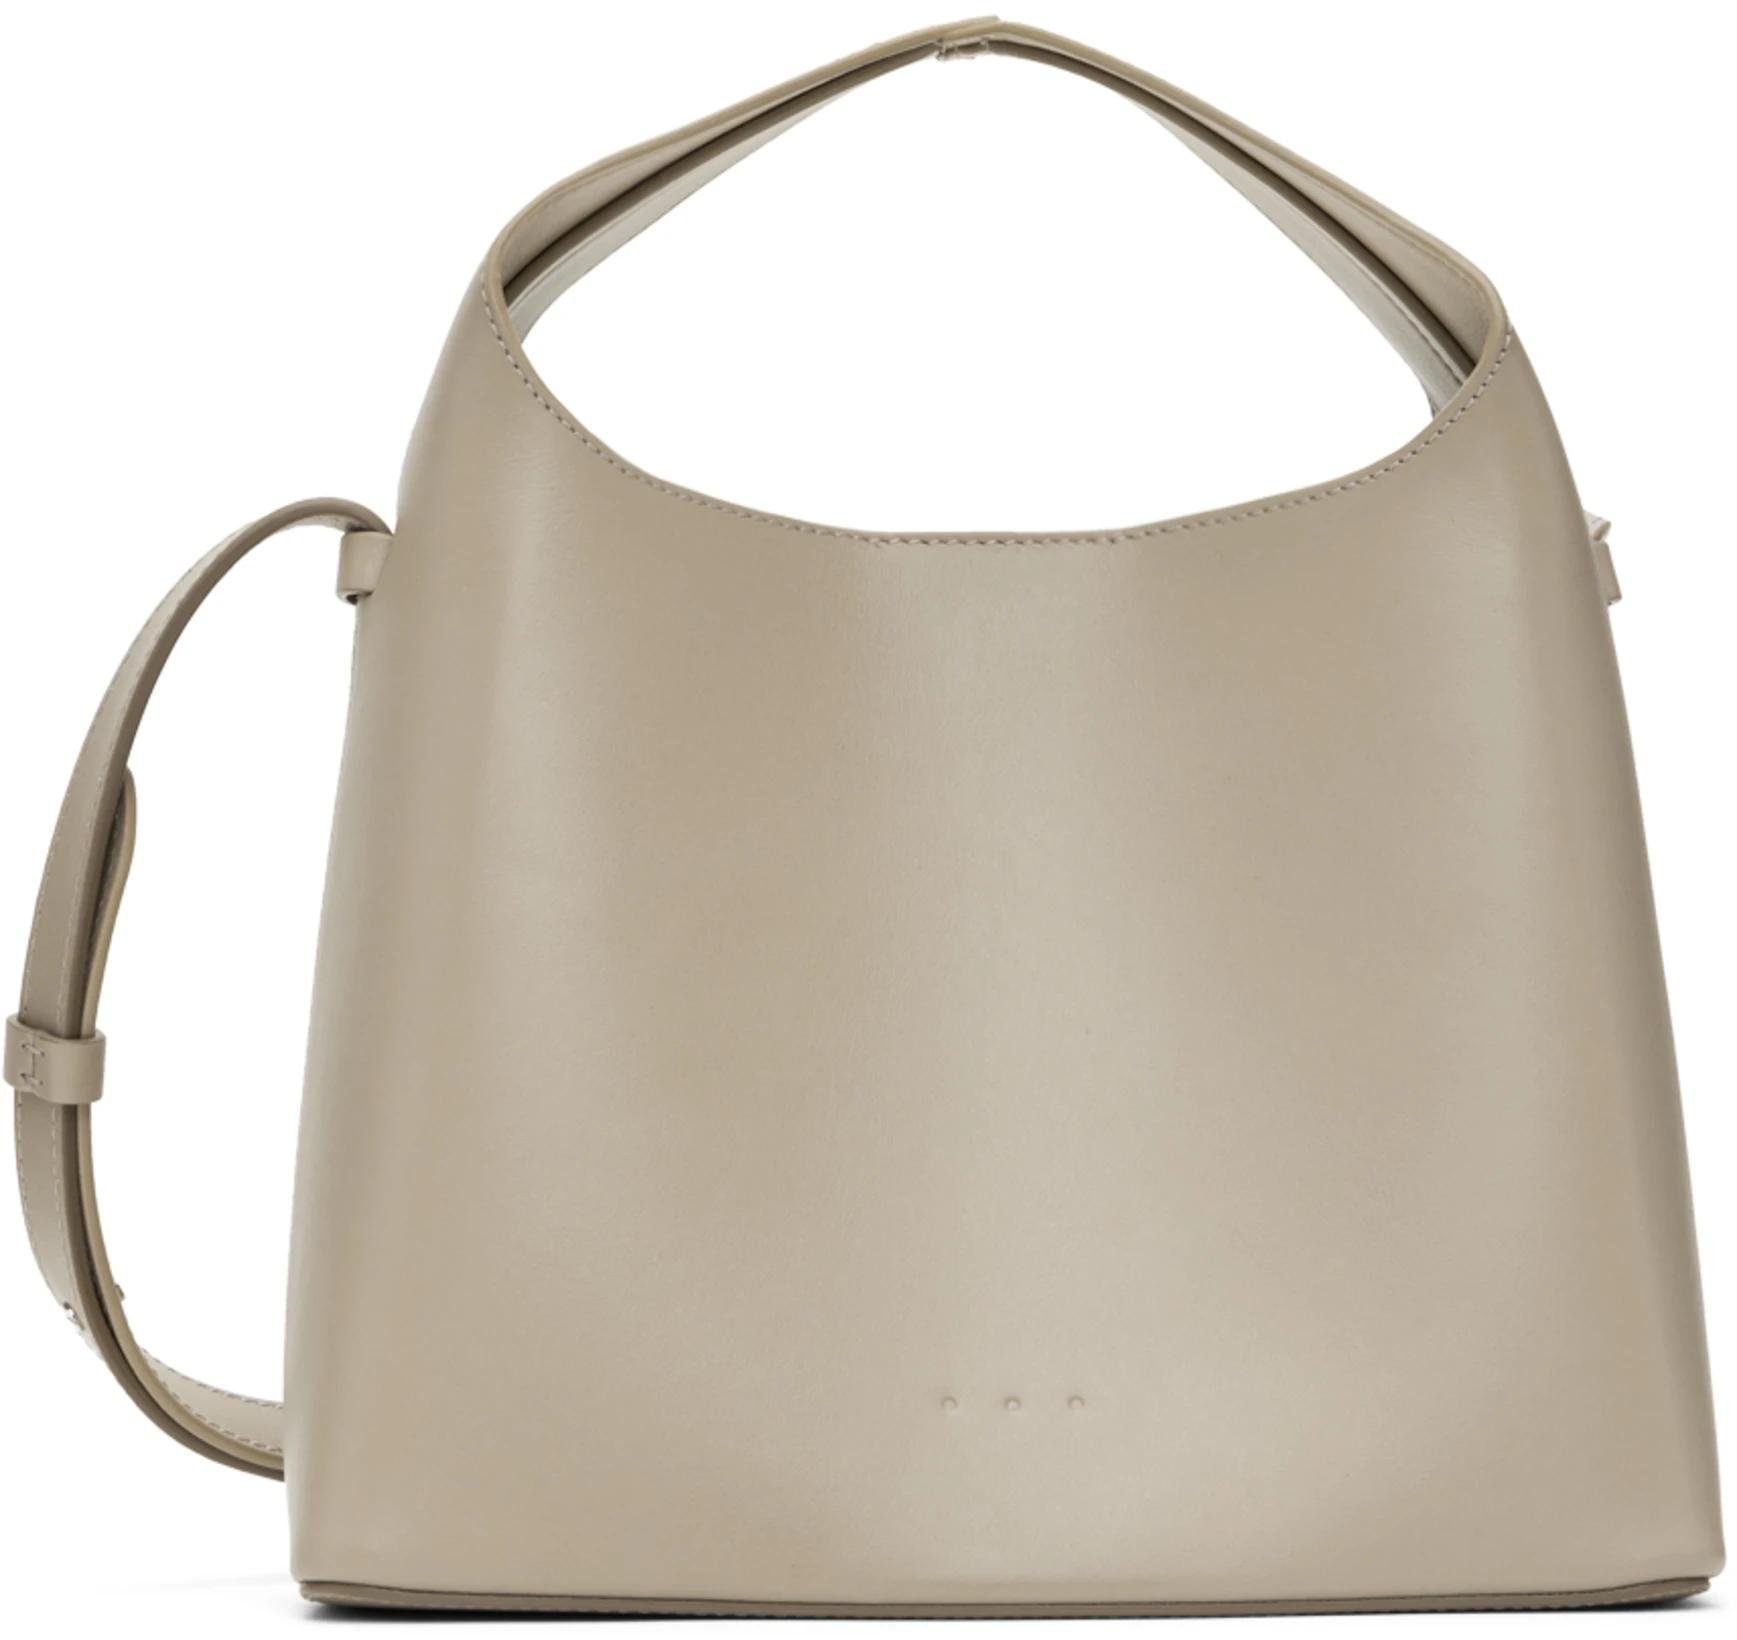 Taupe Mini Sac Shoulder Bag by AESTHER EKME